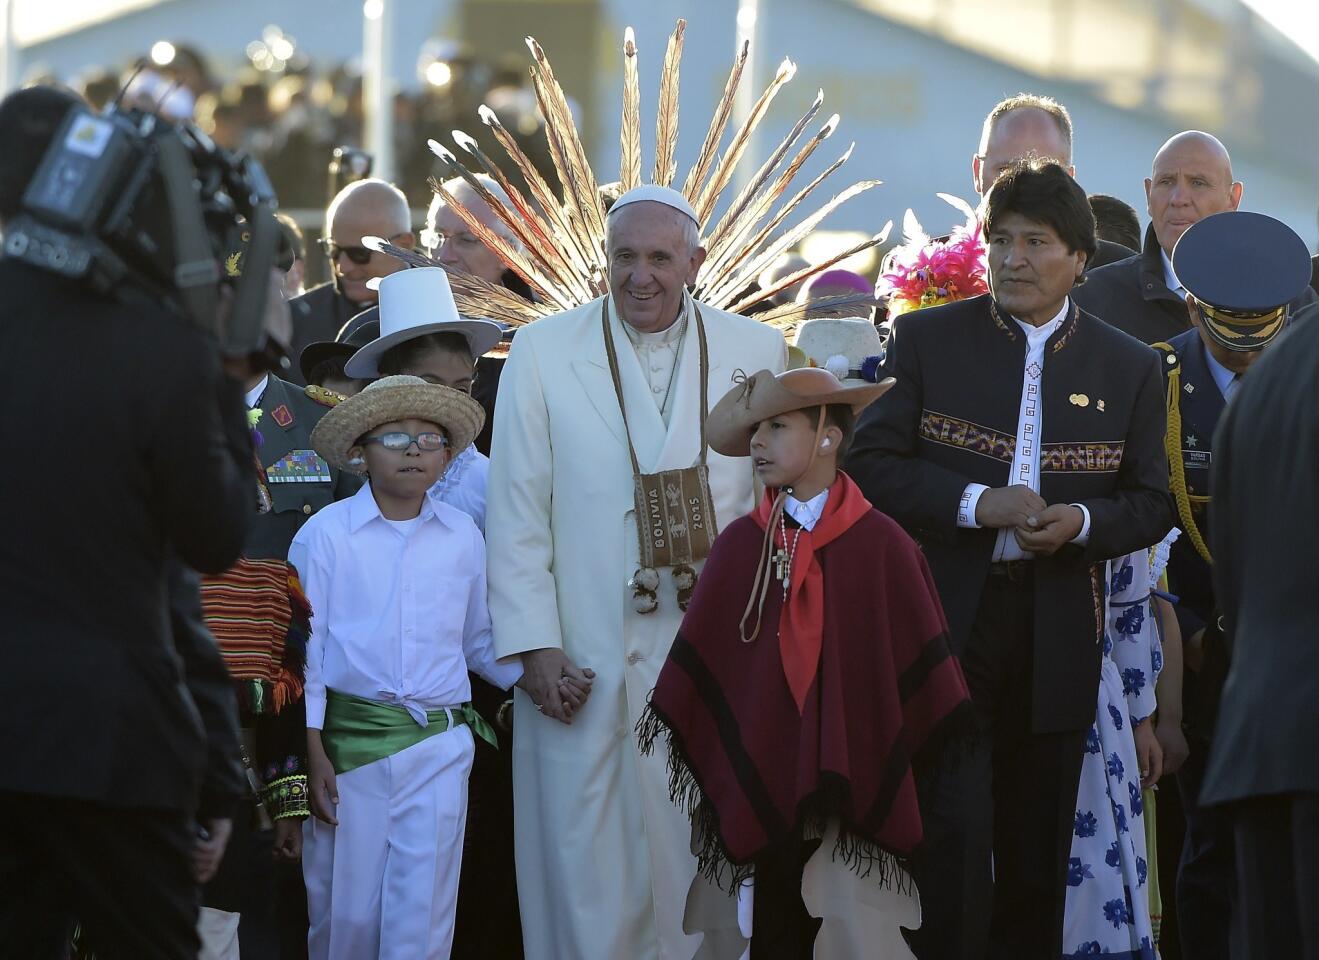 Pope Francis greets indigenous children next to Bolivian President Evo Morales during a welcoming ceremony in El Alto, a plateau over La Paz, 4,000 meters above sea level, on his first visit to Bolivia.